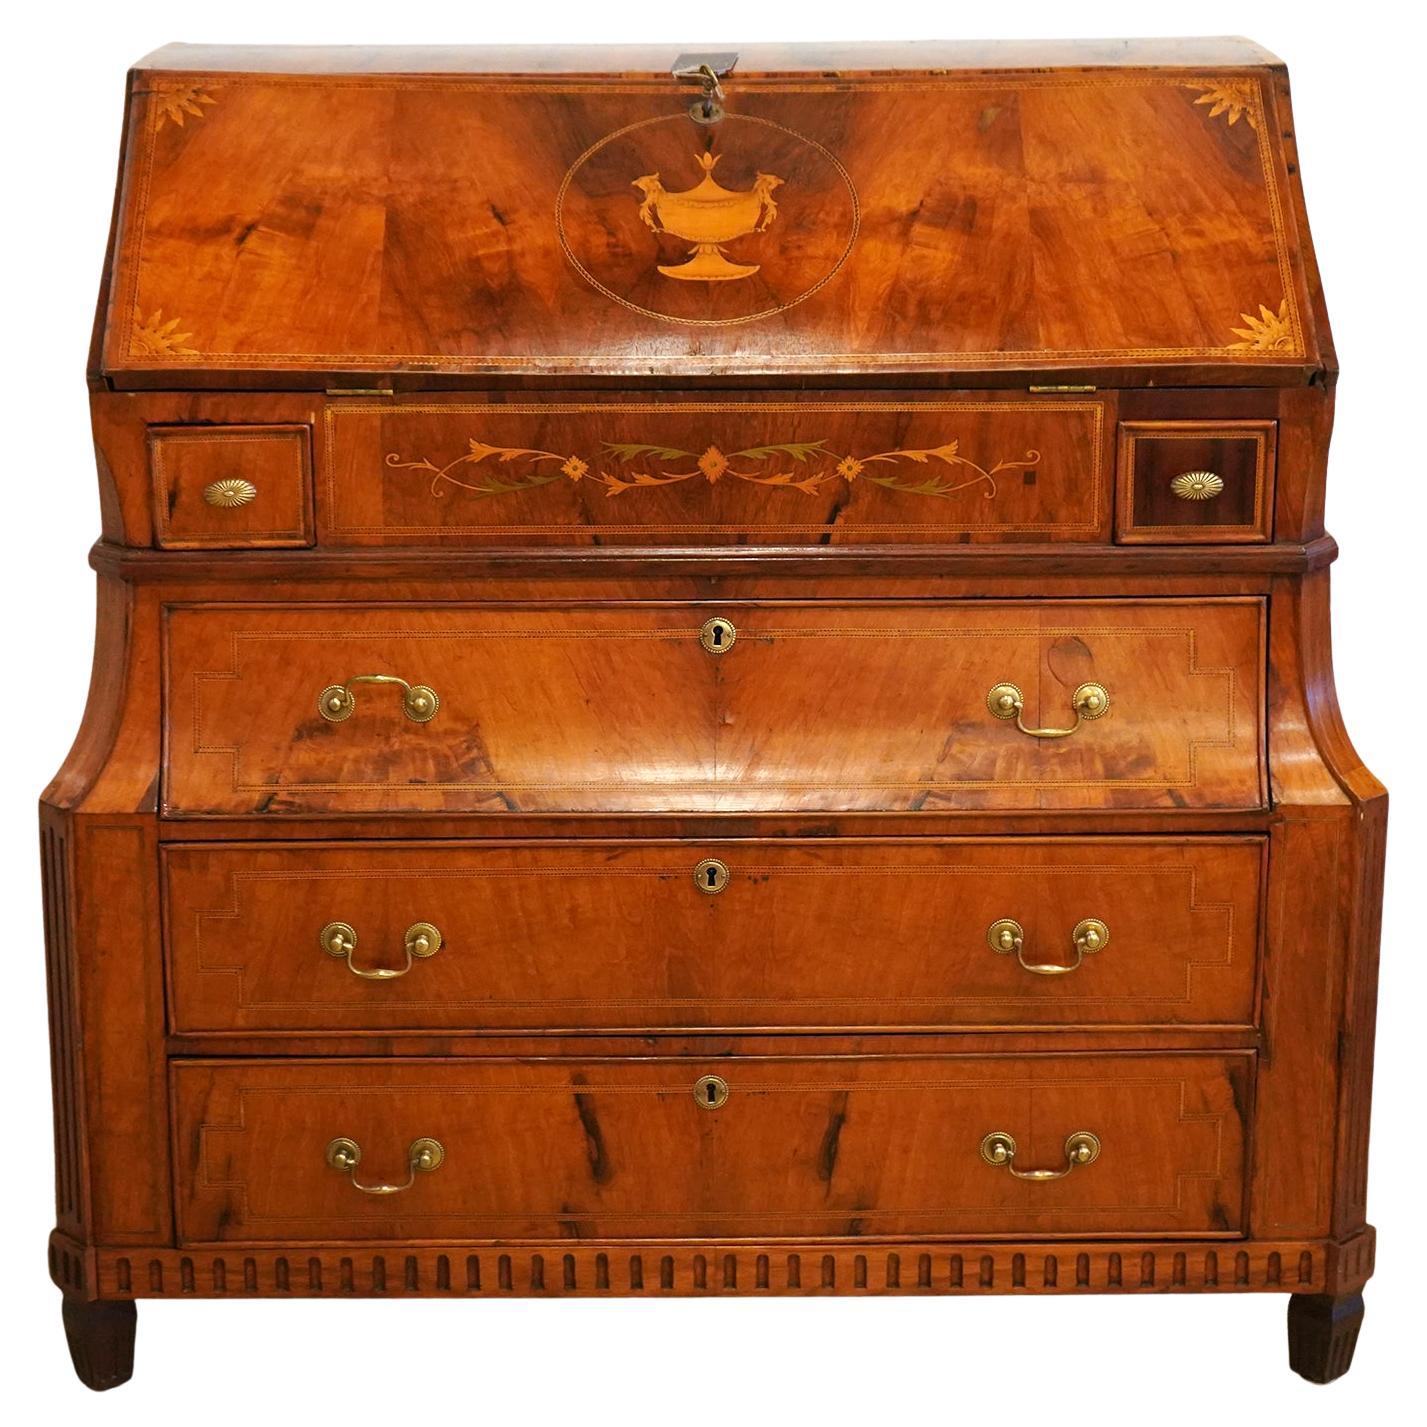 Late 18th C. Dutch Richly Inlaid Two Part Walnut and Satinwod Fall Front Bureau For Sale